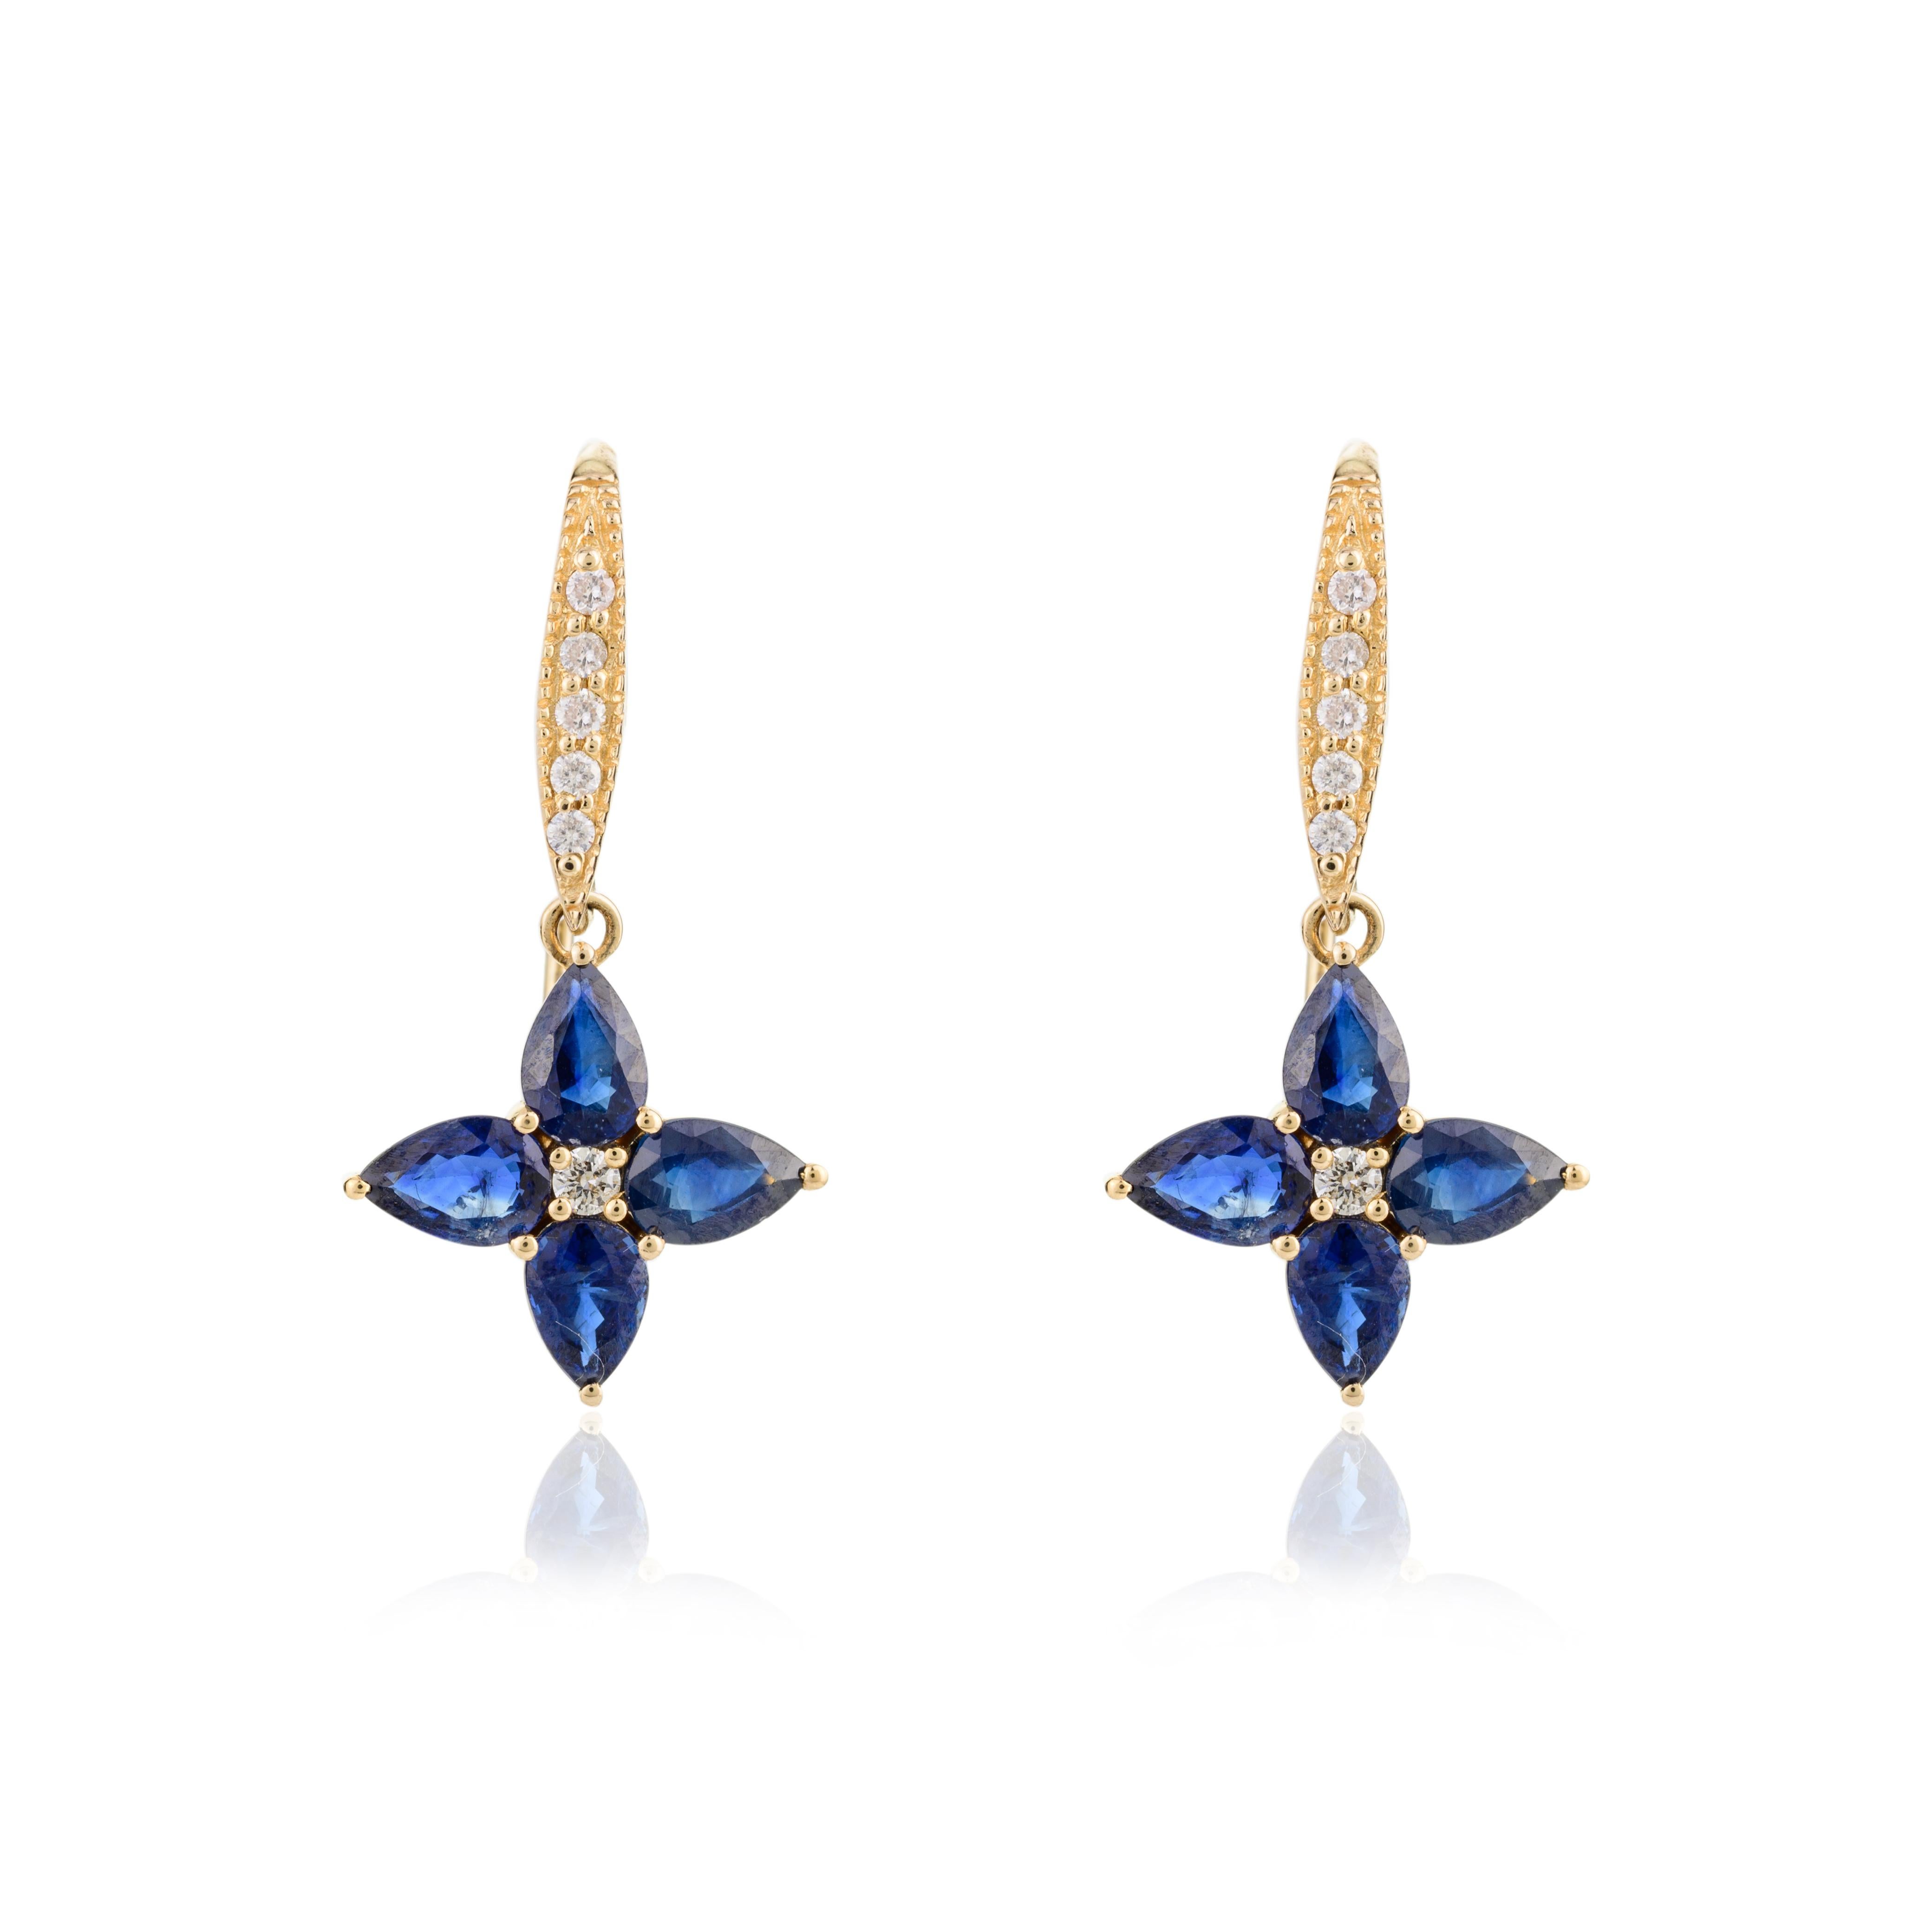 Natural Diamond and Blue Sapphire Flower Drop Earrings in 14K Gold to make a statement with your look. You shall need stud earrings to make a statement with your look. These earrings create a sparkling, luxurious look featuring pear cut